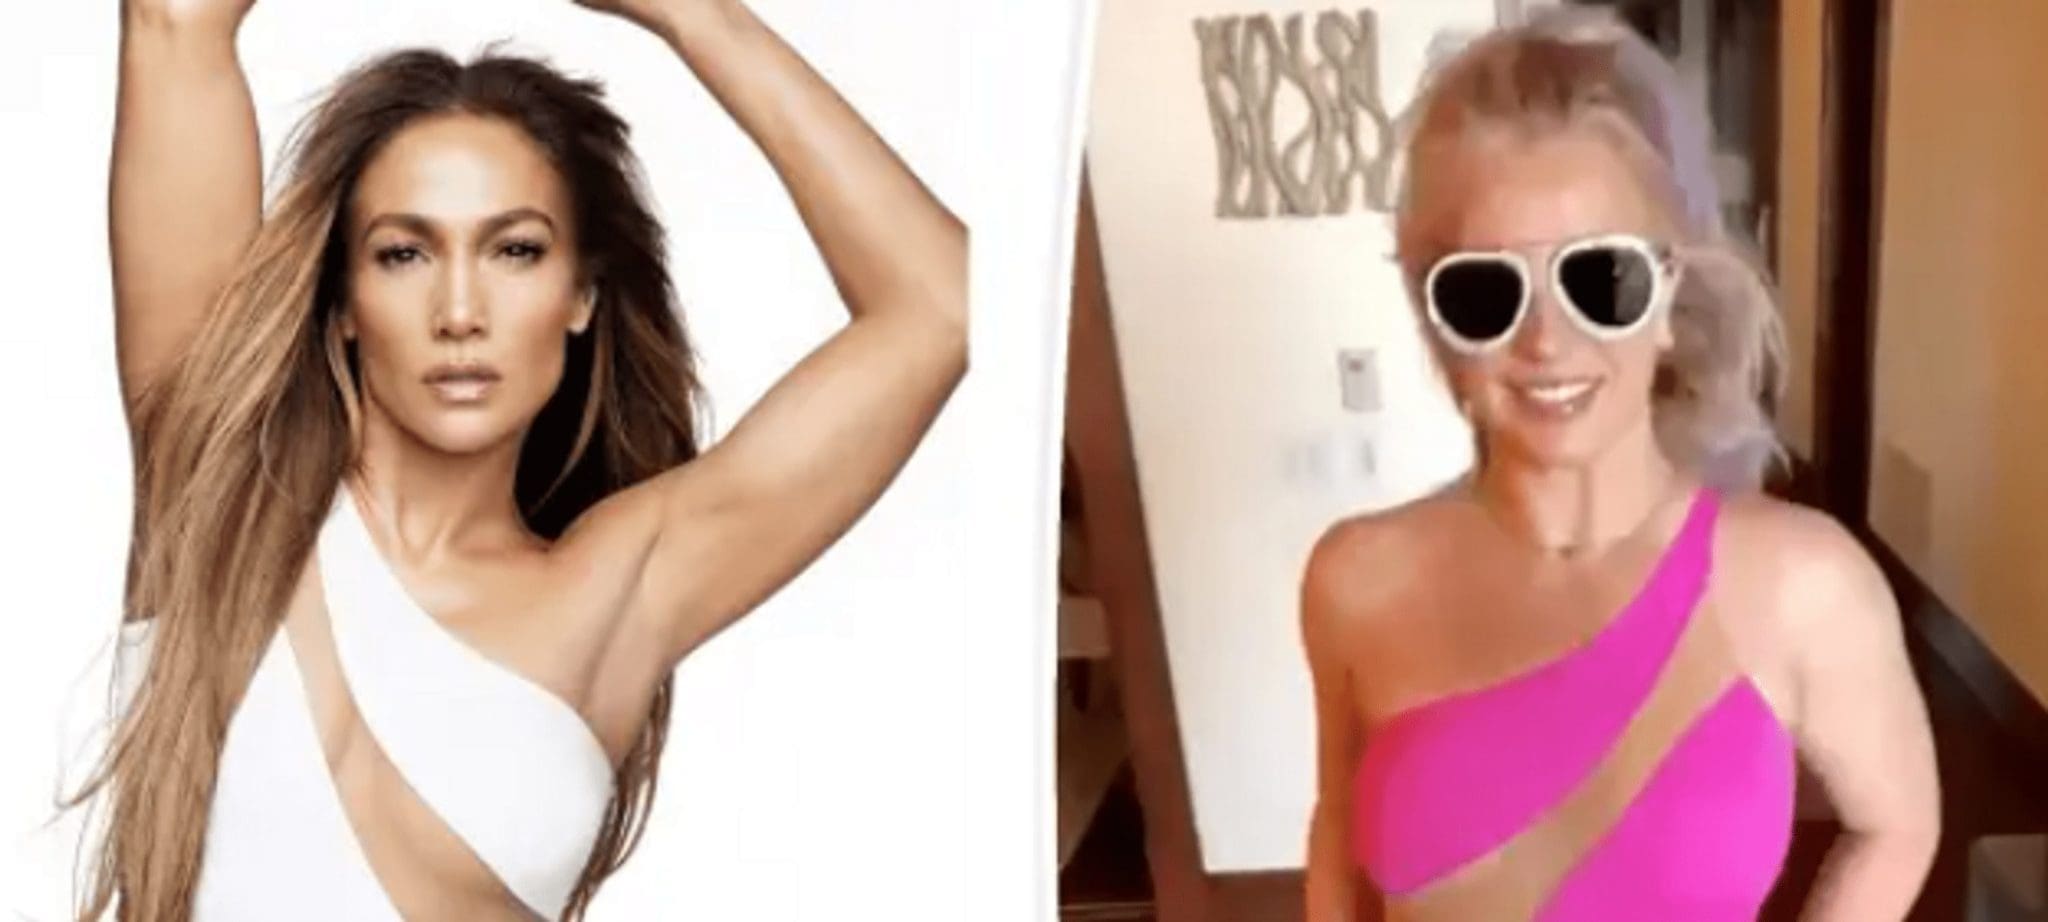 In Similar Swimwear, Jennifer Lopez, Britney Spears, And Kate Beckinsale Pose For A Photo